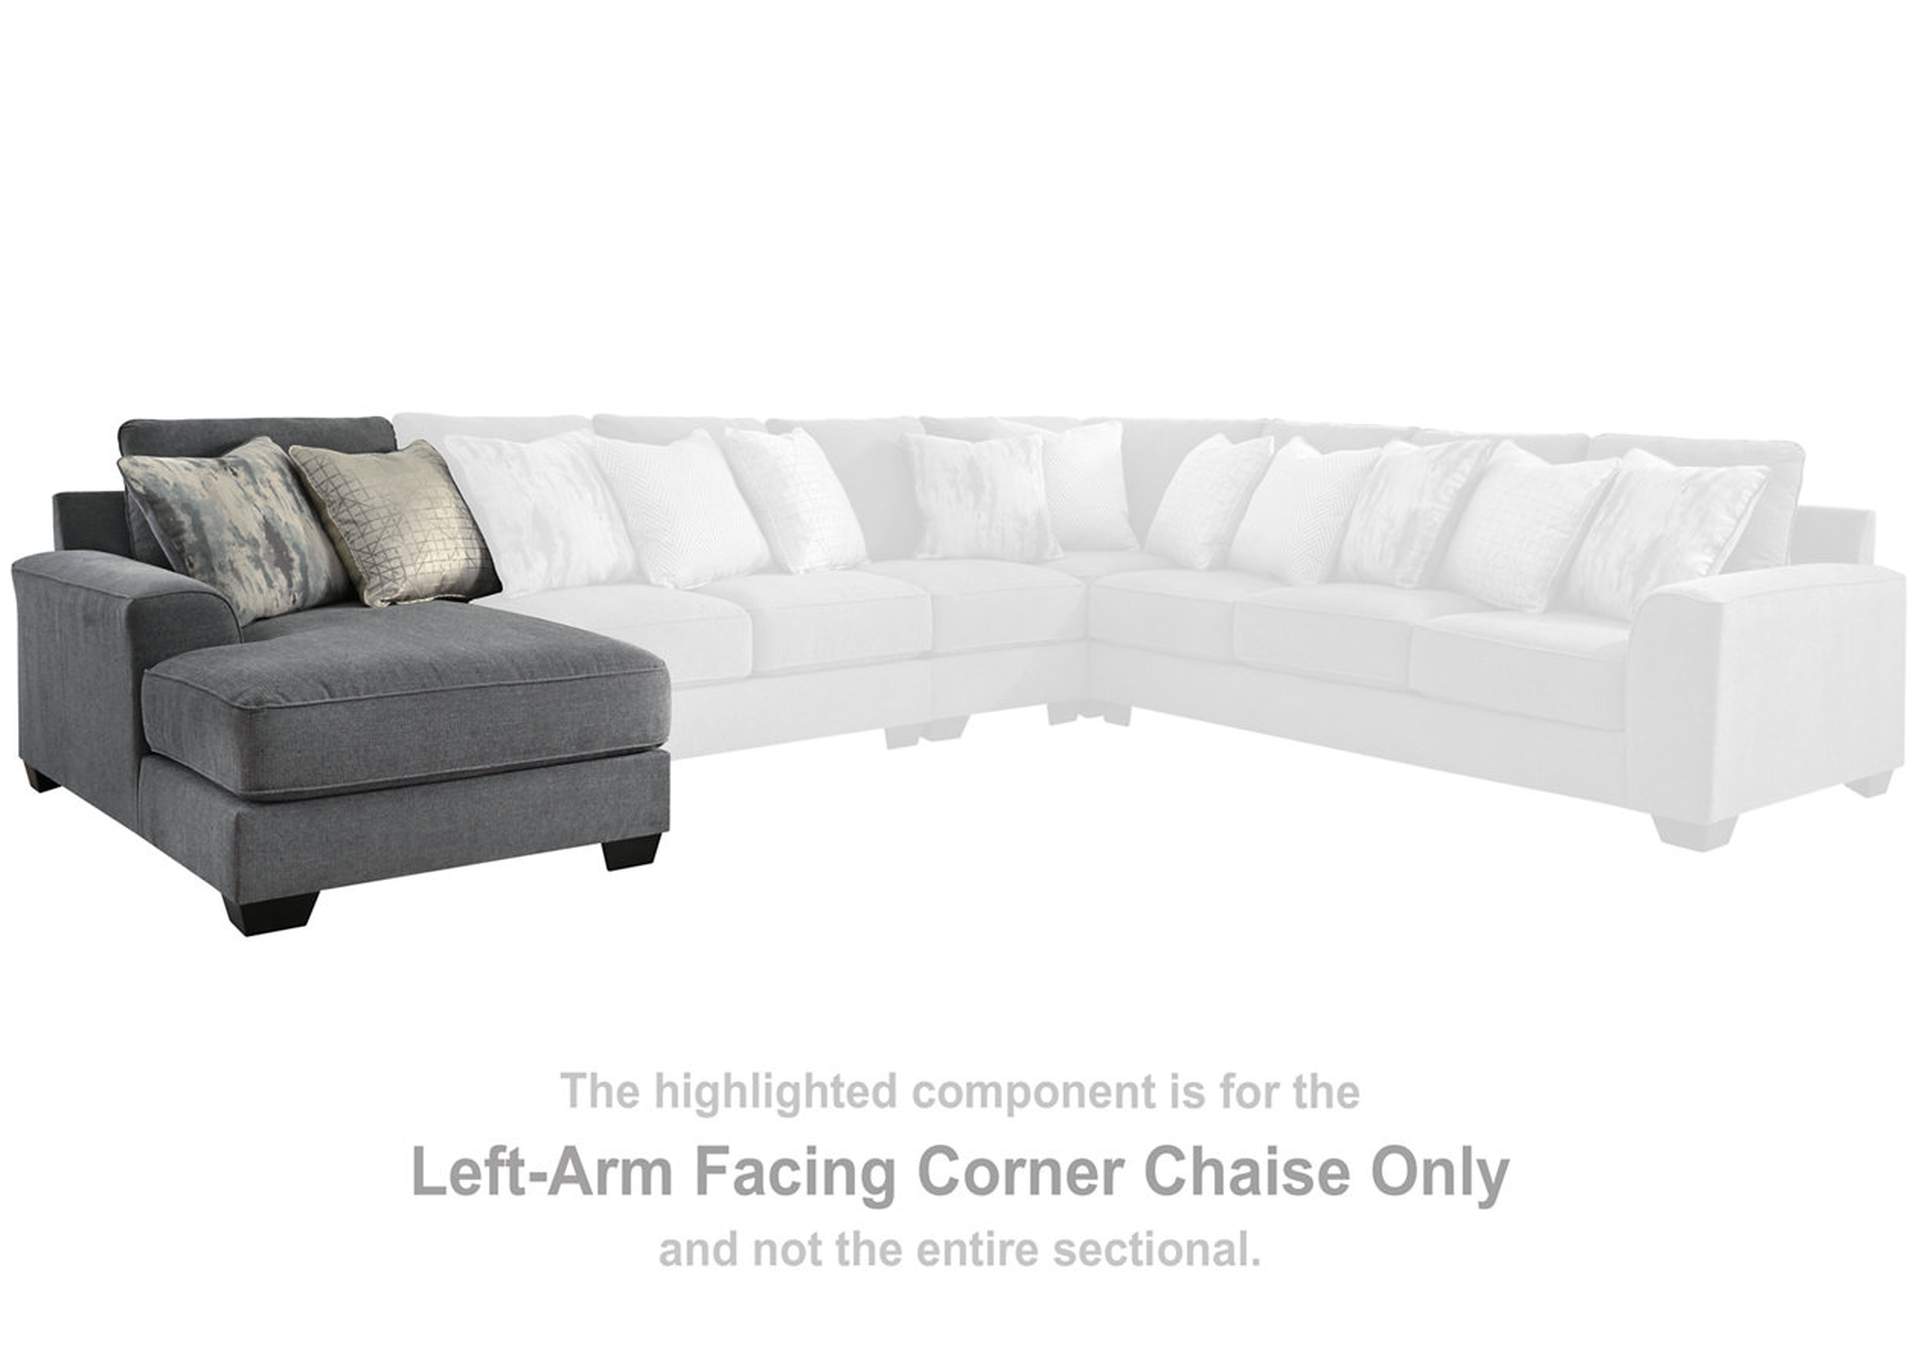 Castano 4-Piece Sectional with Chaise,Ashley